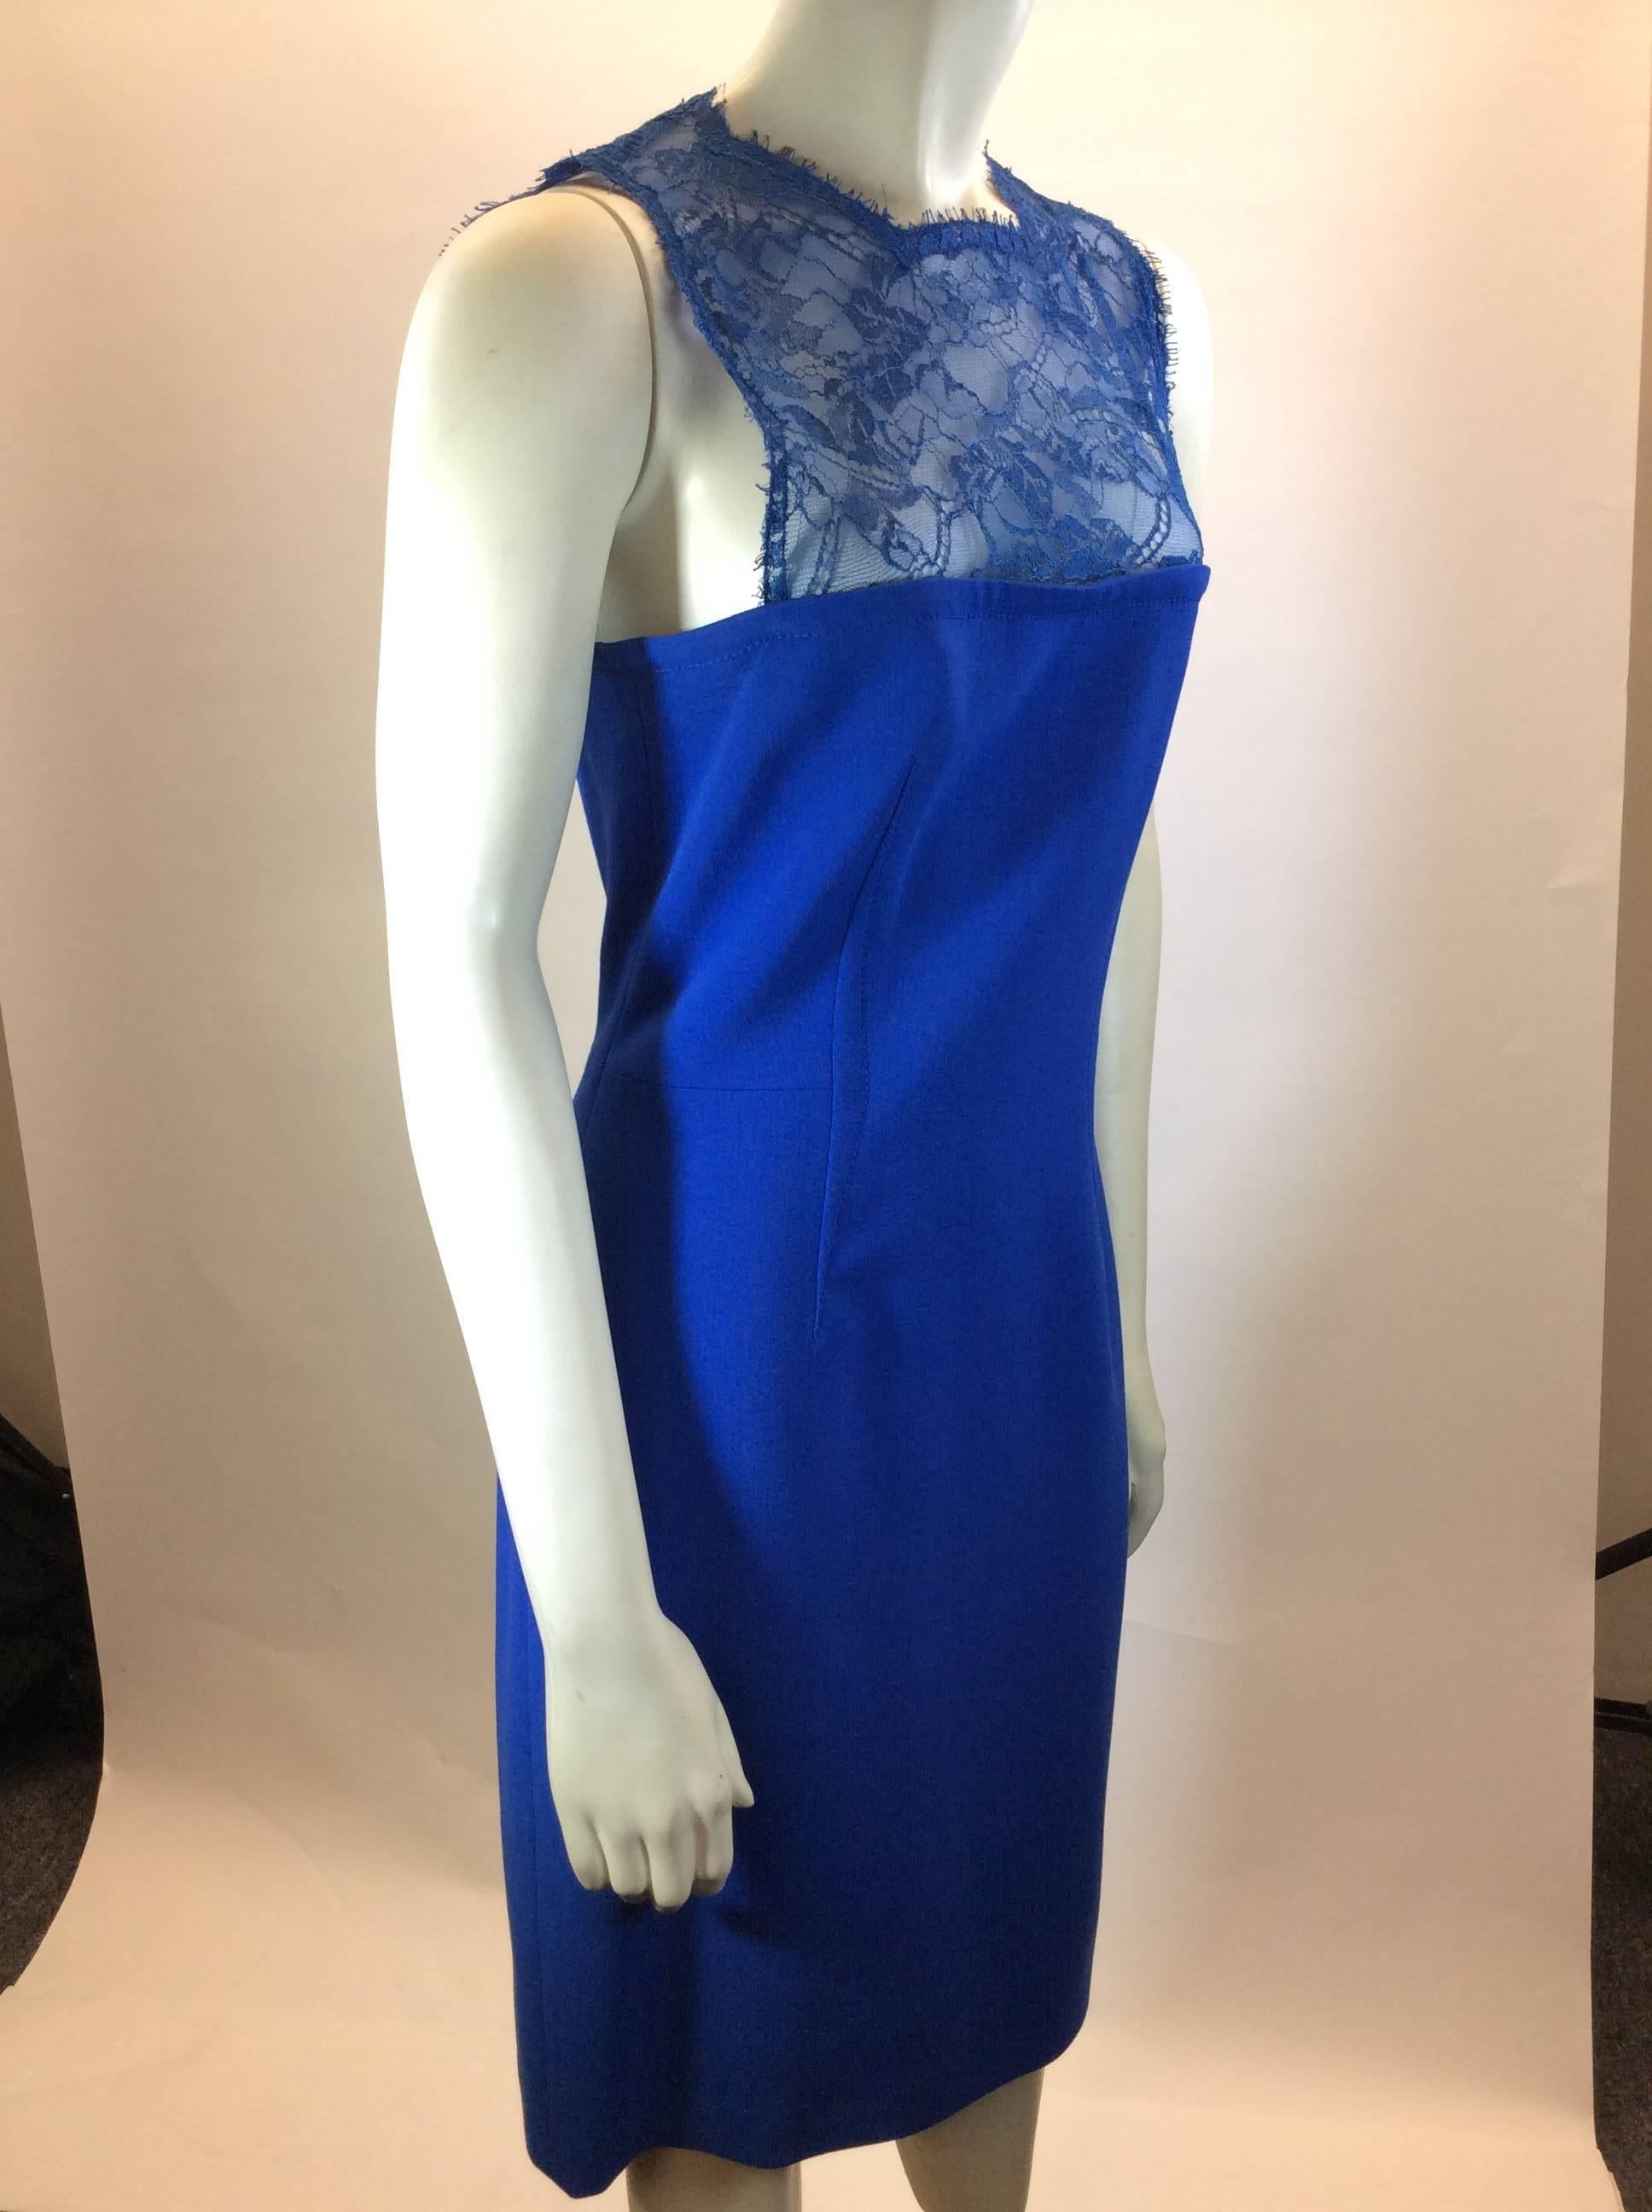 Royal Blue 
Detailed Lace Top 
Zipper up back and Small Clasp for Closure
Opening on back In Lace
US Size 8